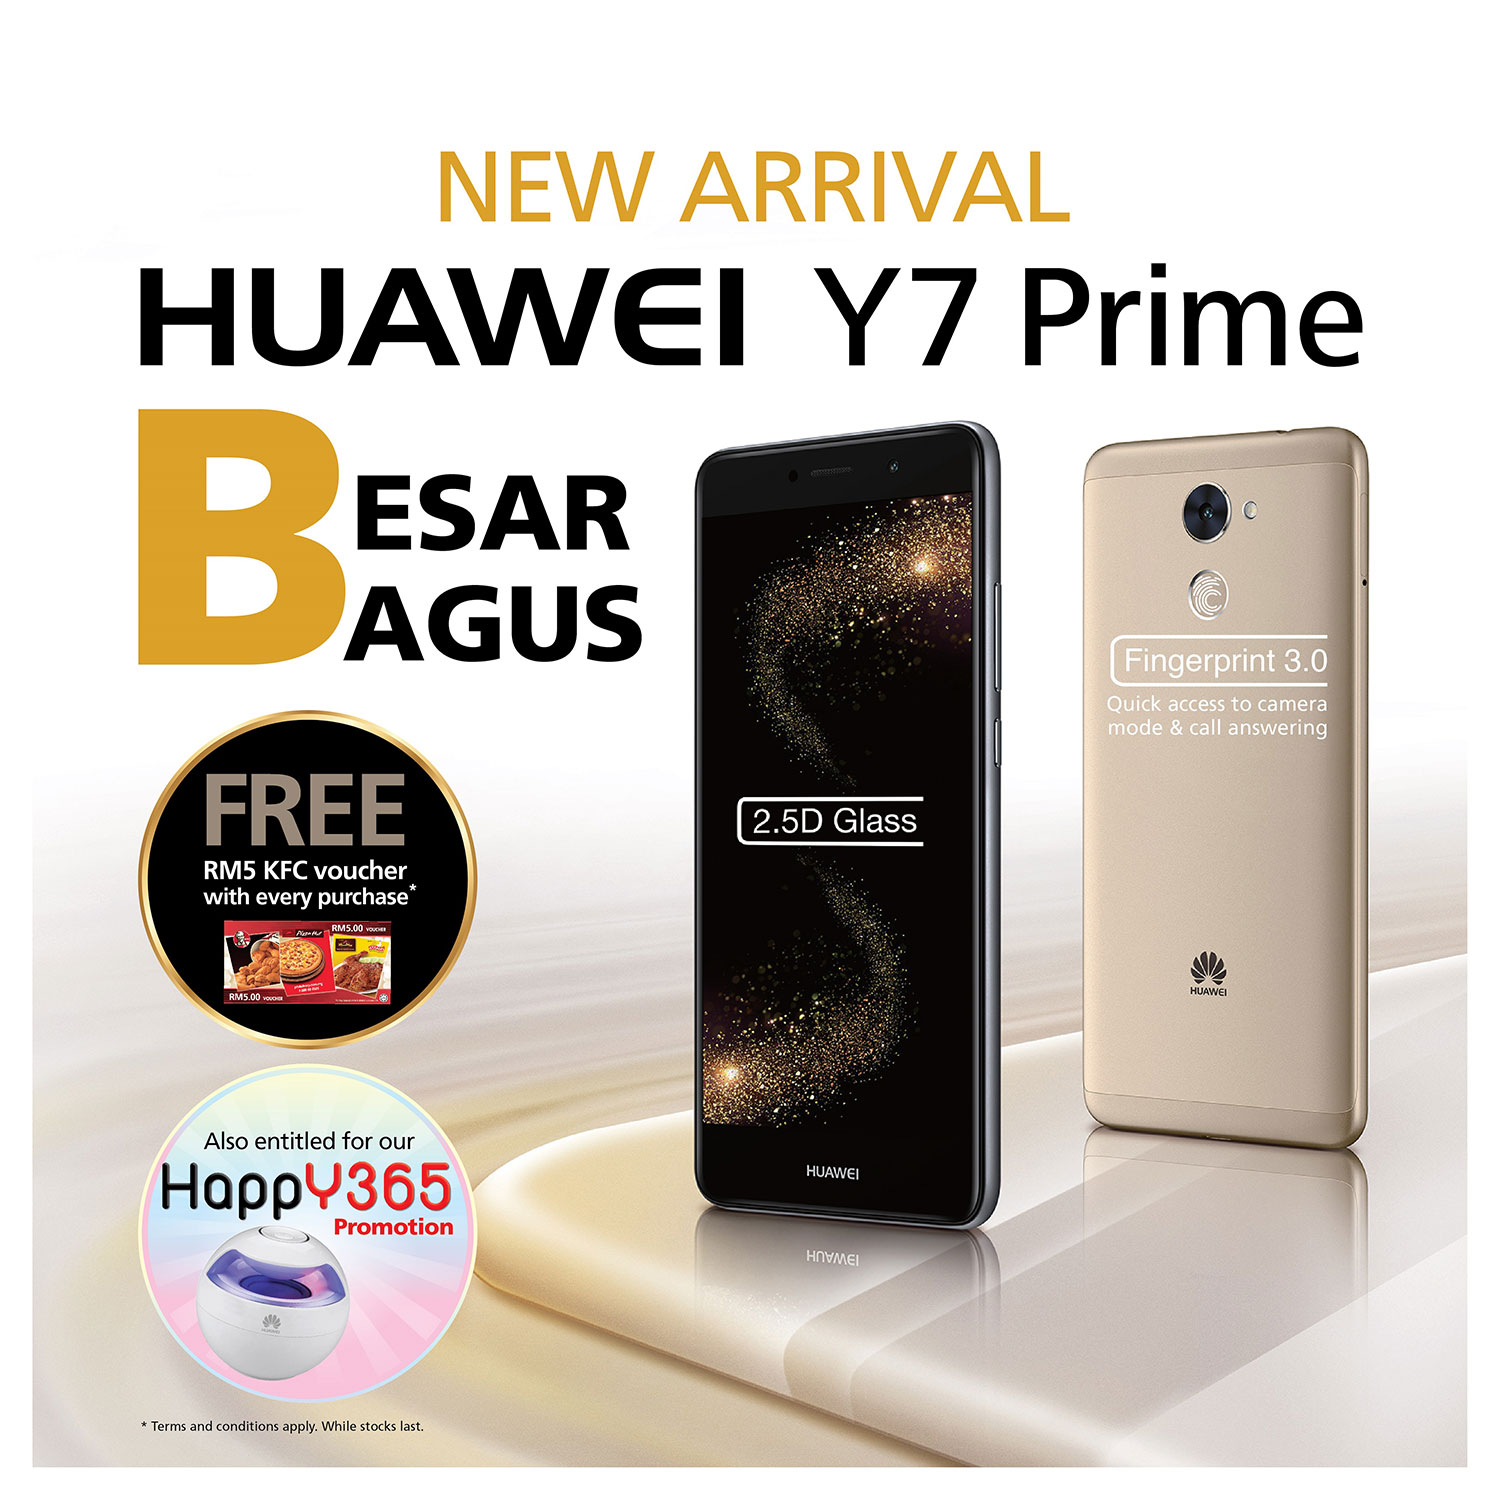 Huawei Y7 Prime To Be Available on July 7